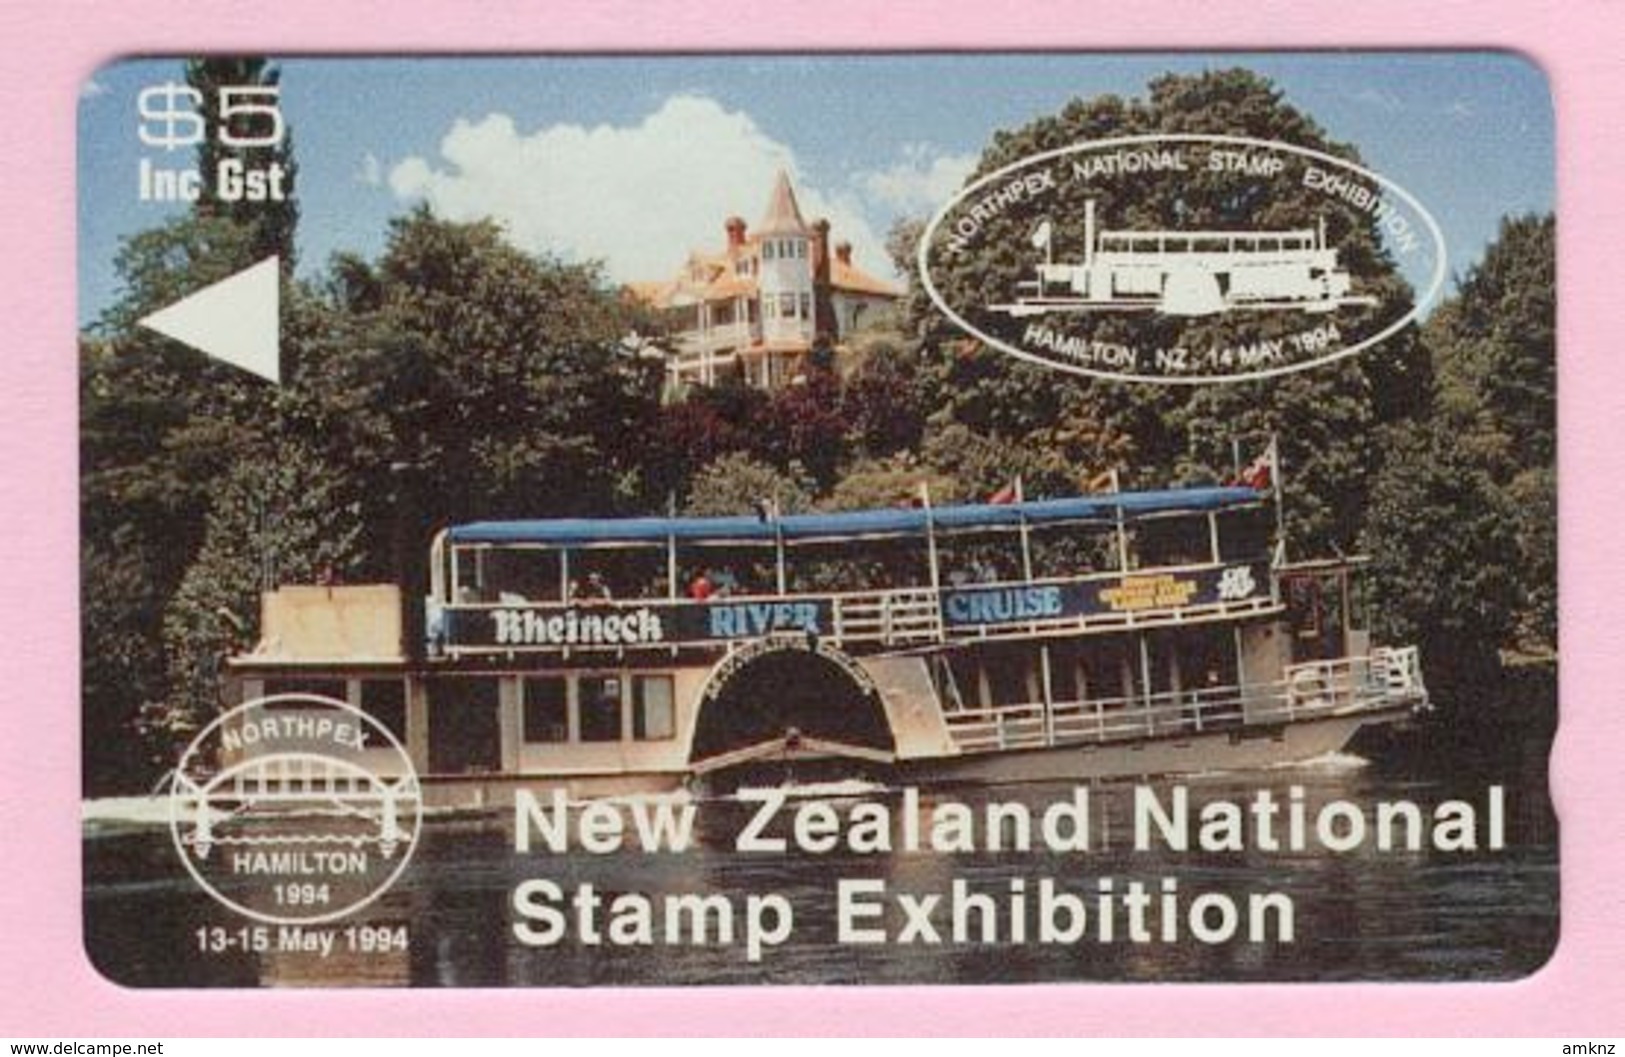 New Zealand - Private Overprint - 1994 Northpex'94 Stamp Expo - $5 River Boat - Mint - NZ-CO-35 - Neuseeland